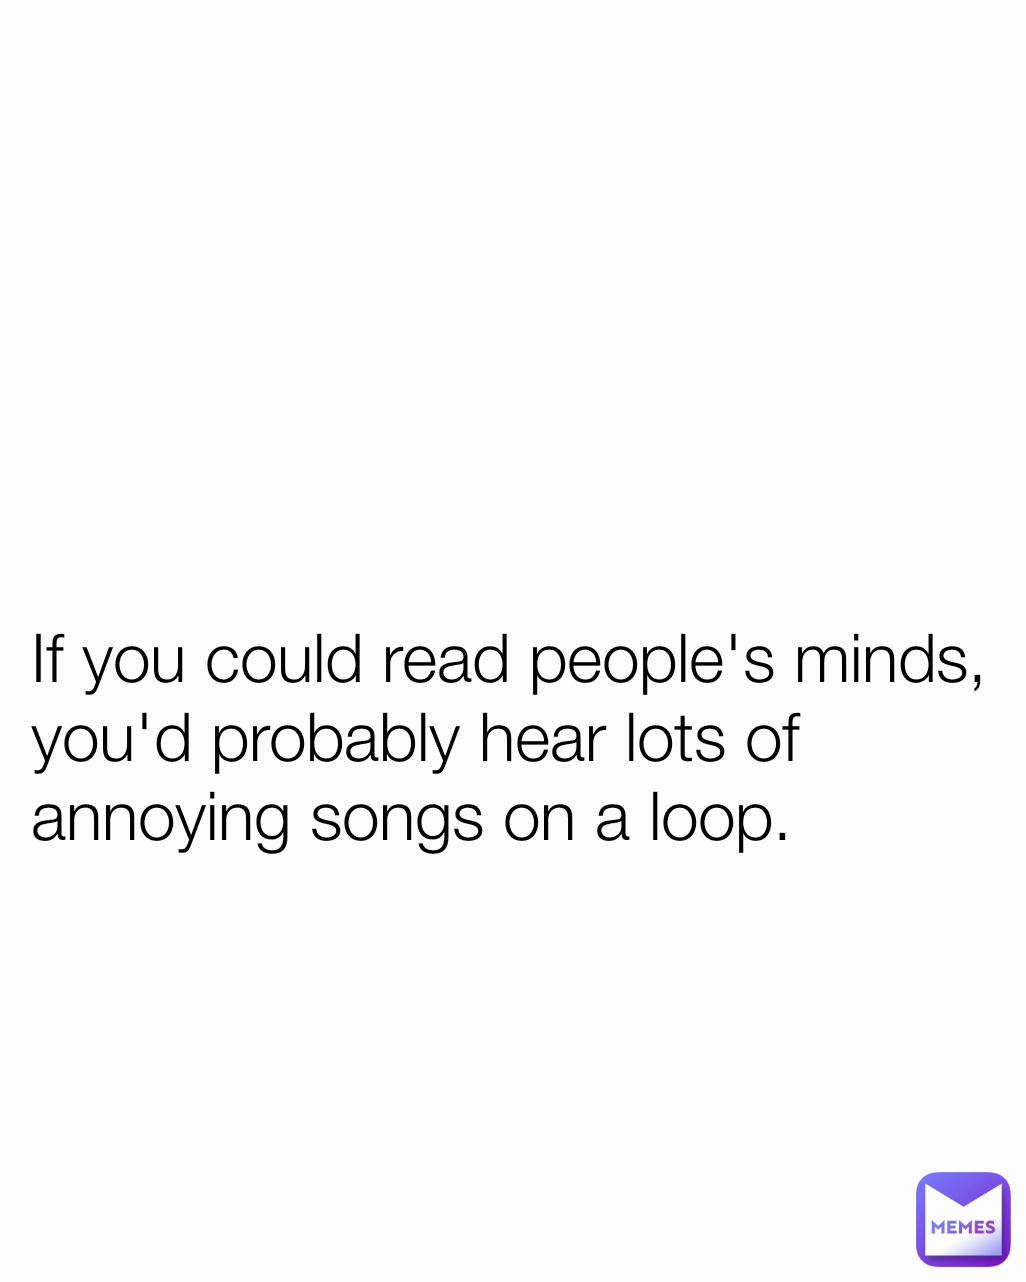 If you could read people's minds, you'd probably hear lots of annoying songs on a loop.